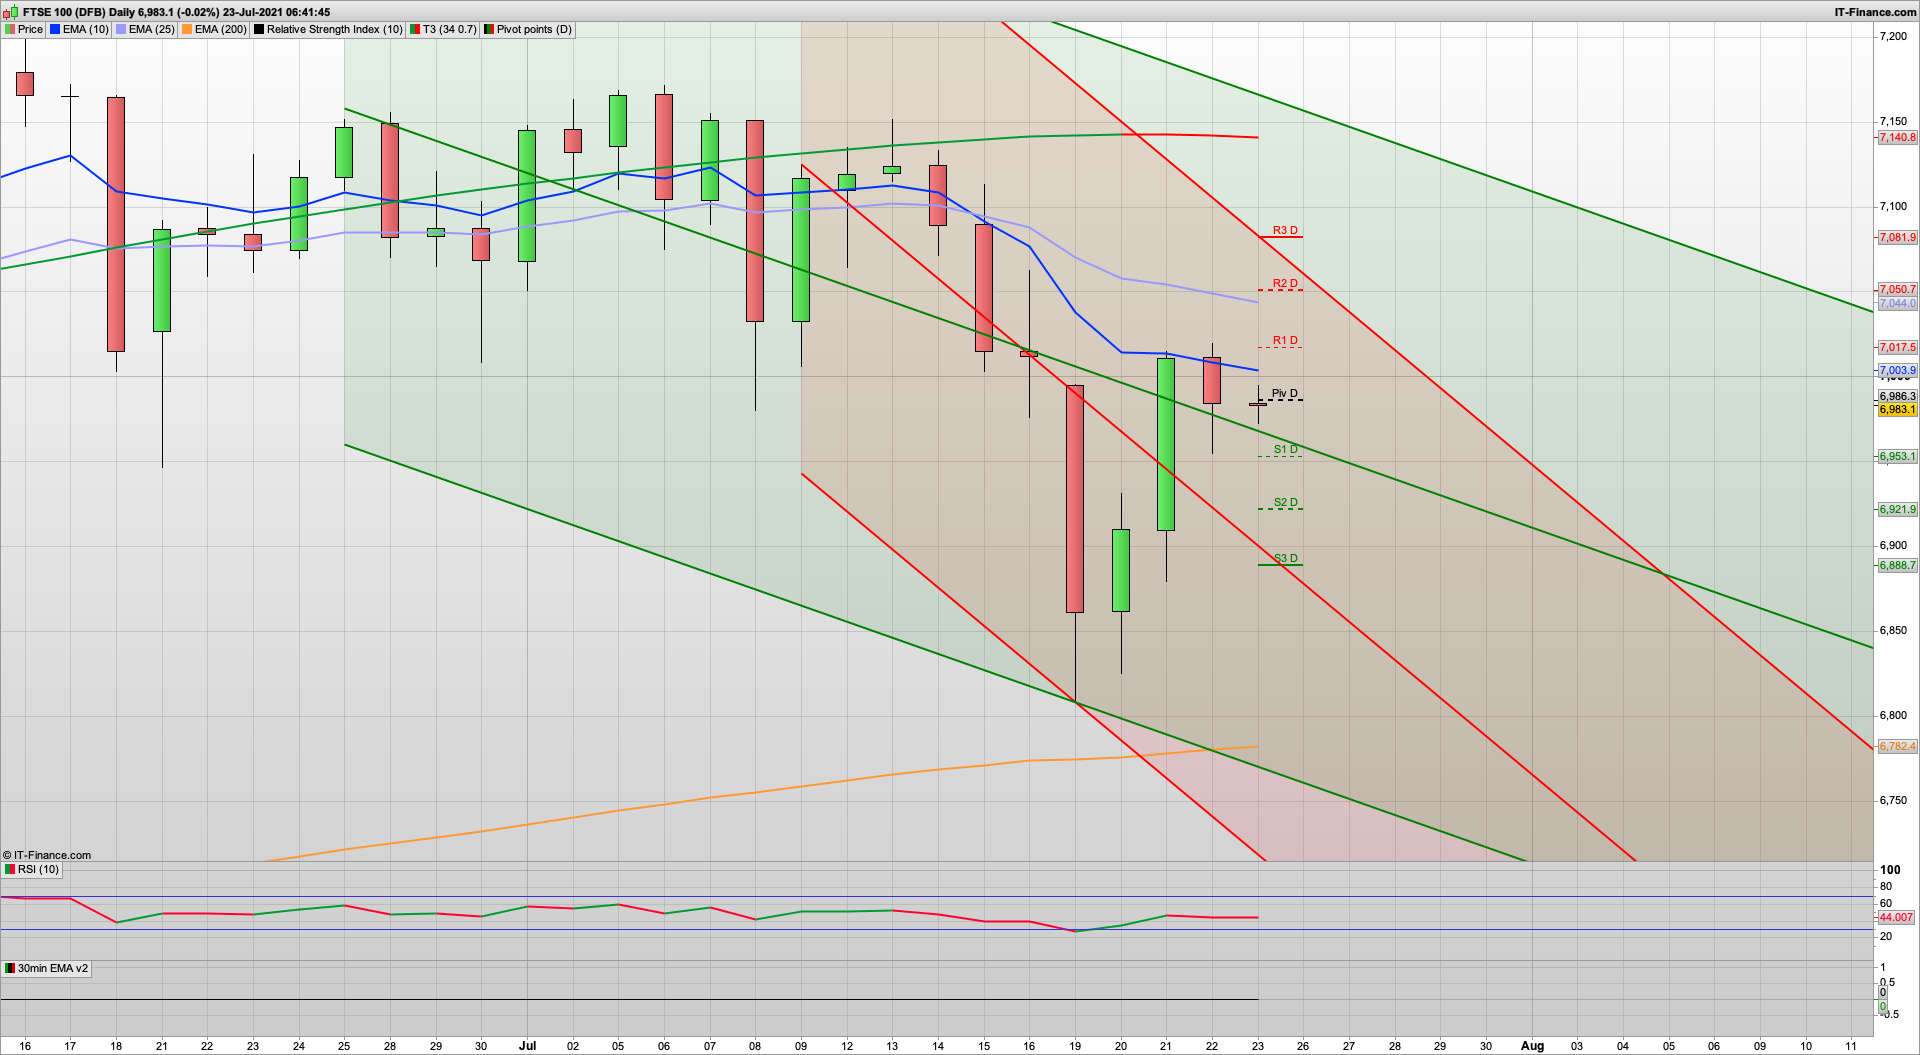 Bulls back in the driving seat but need to break 7050 | 6974 6953 support | Looking positive for now